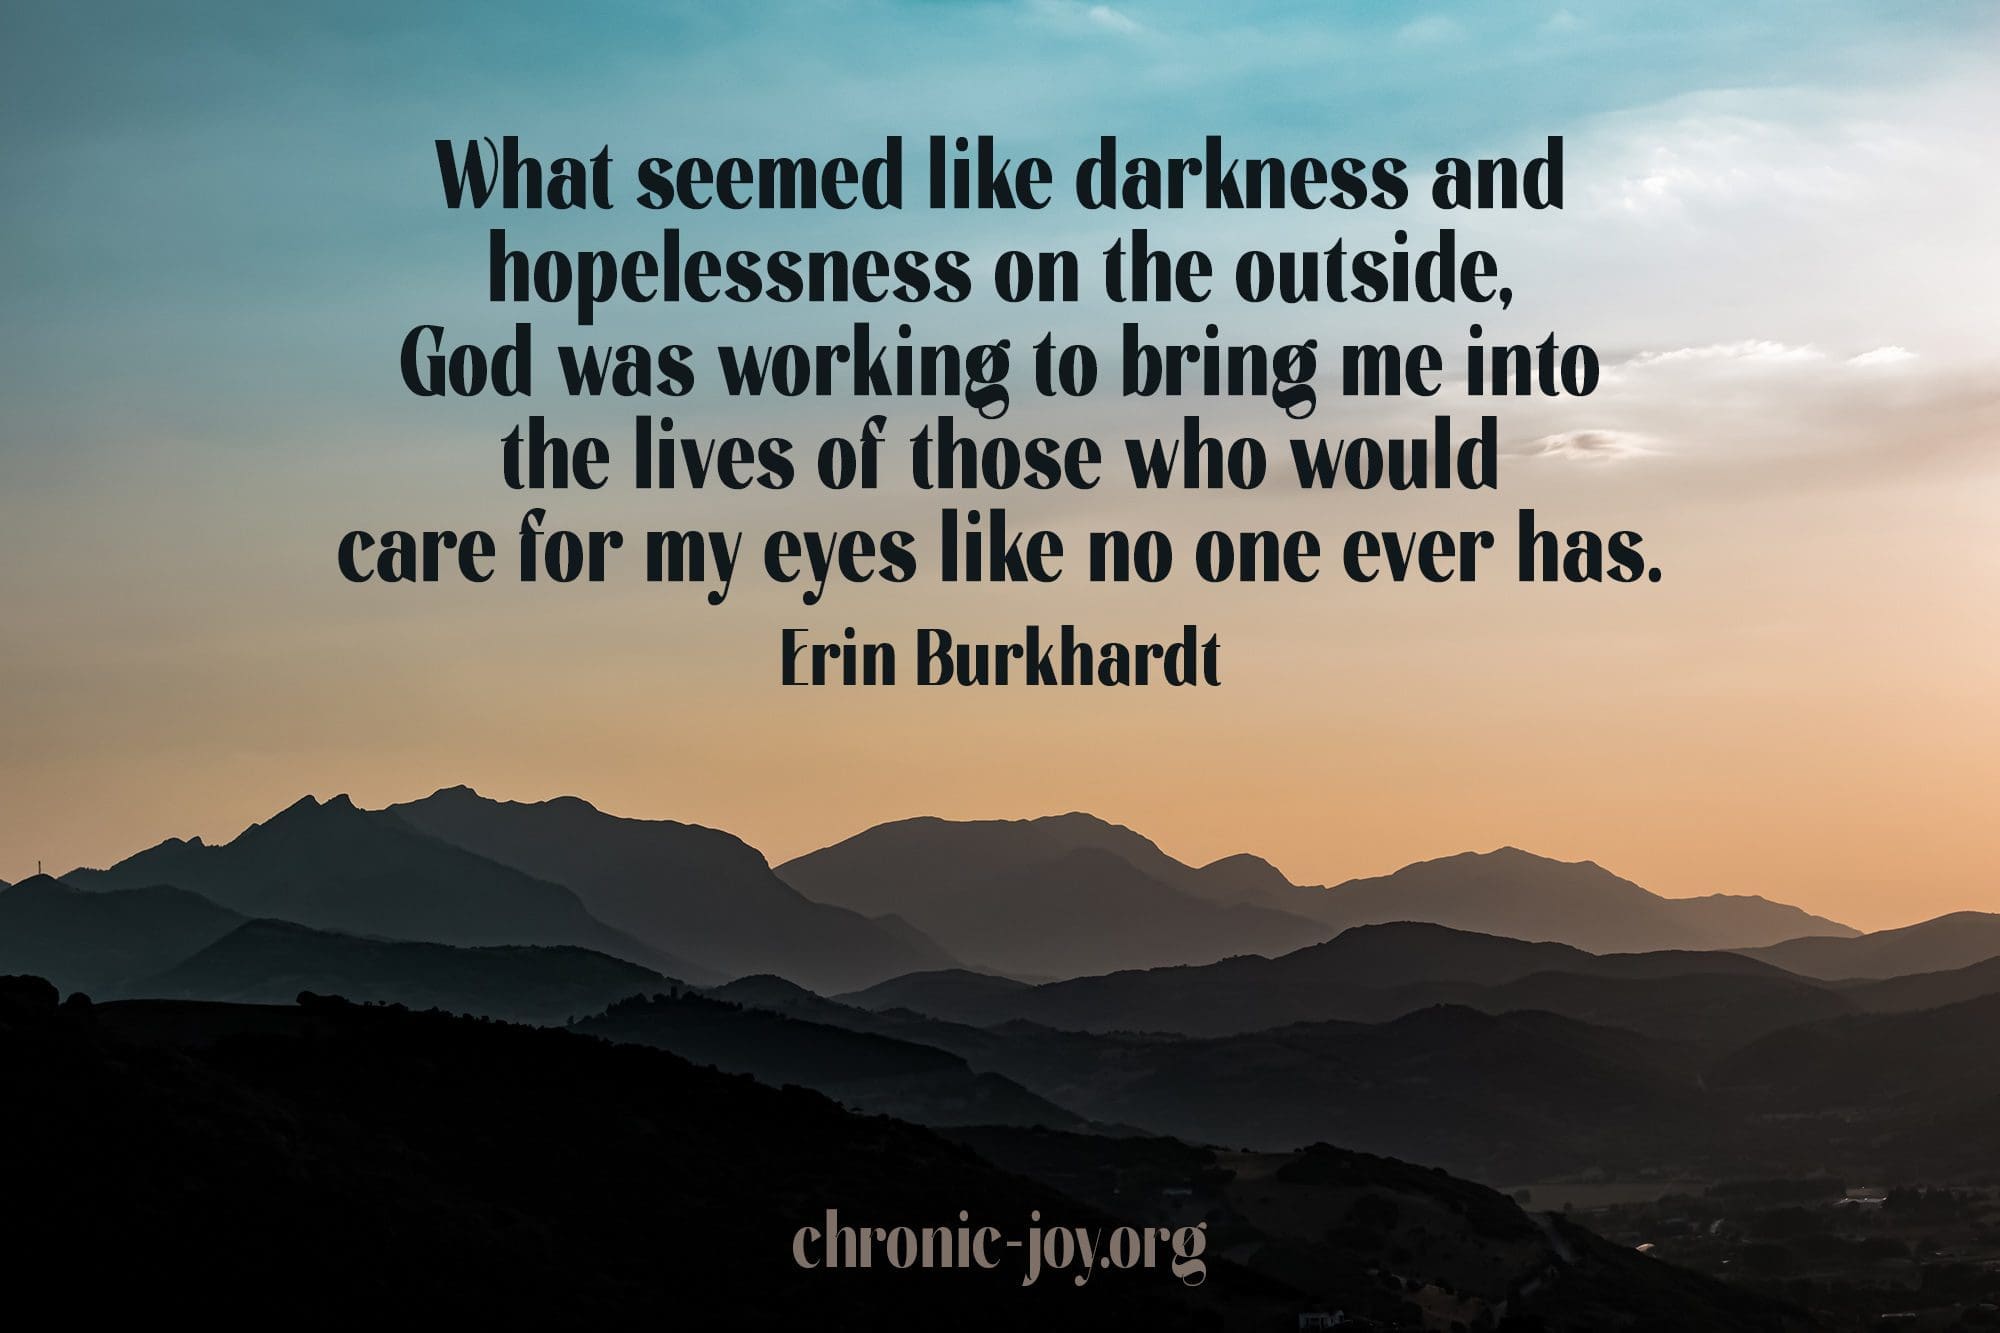 "What seemed like darkness and hopelessness on the outside, God was working to bring me into the lives of those who would care for my eyes like no one ever has." Erin Burkhardt